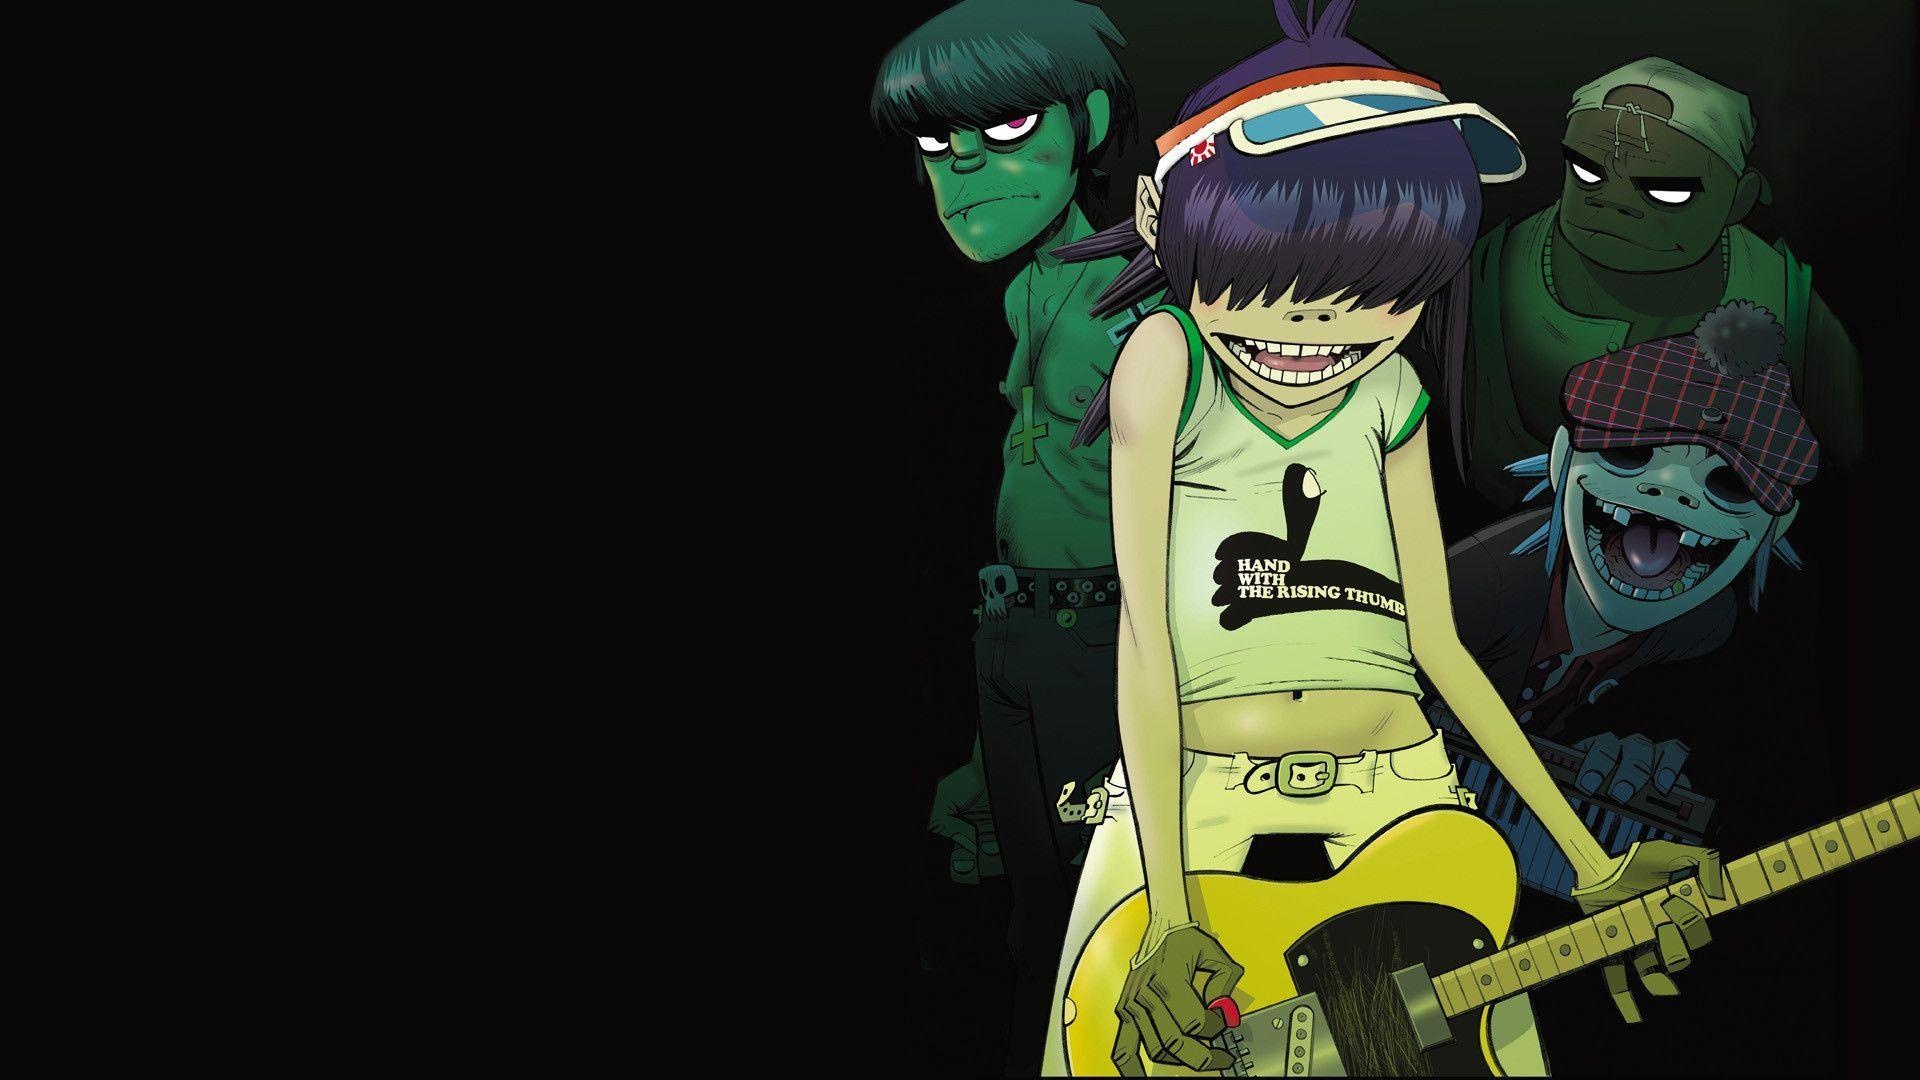 Noodle (Gorillaz): Animated group, Musician Damon Albarn and artist Jamie Hewlett, A variety of musical styles. 1920x1080 Full HD Wallpaper.